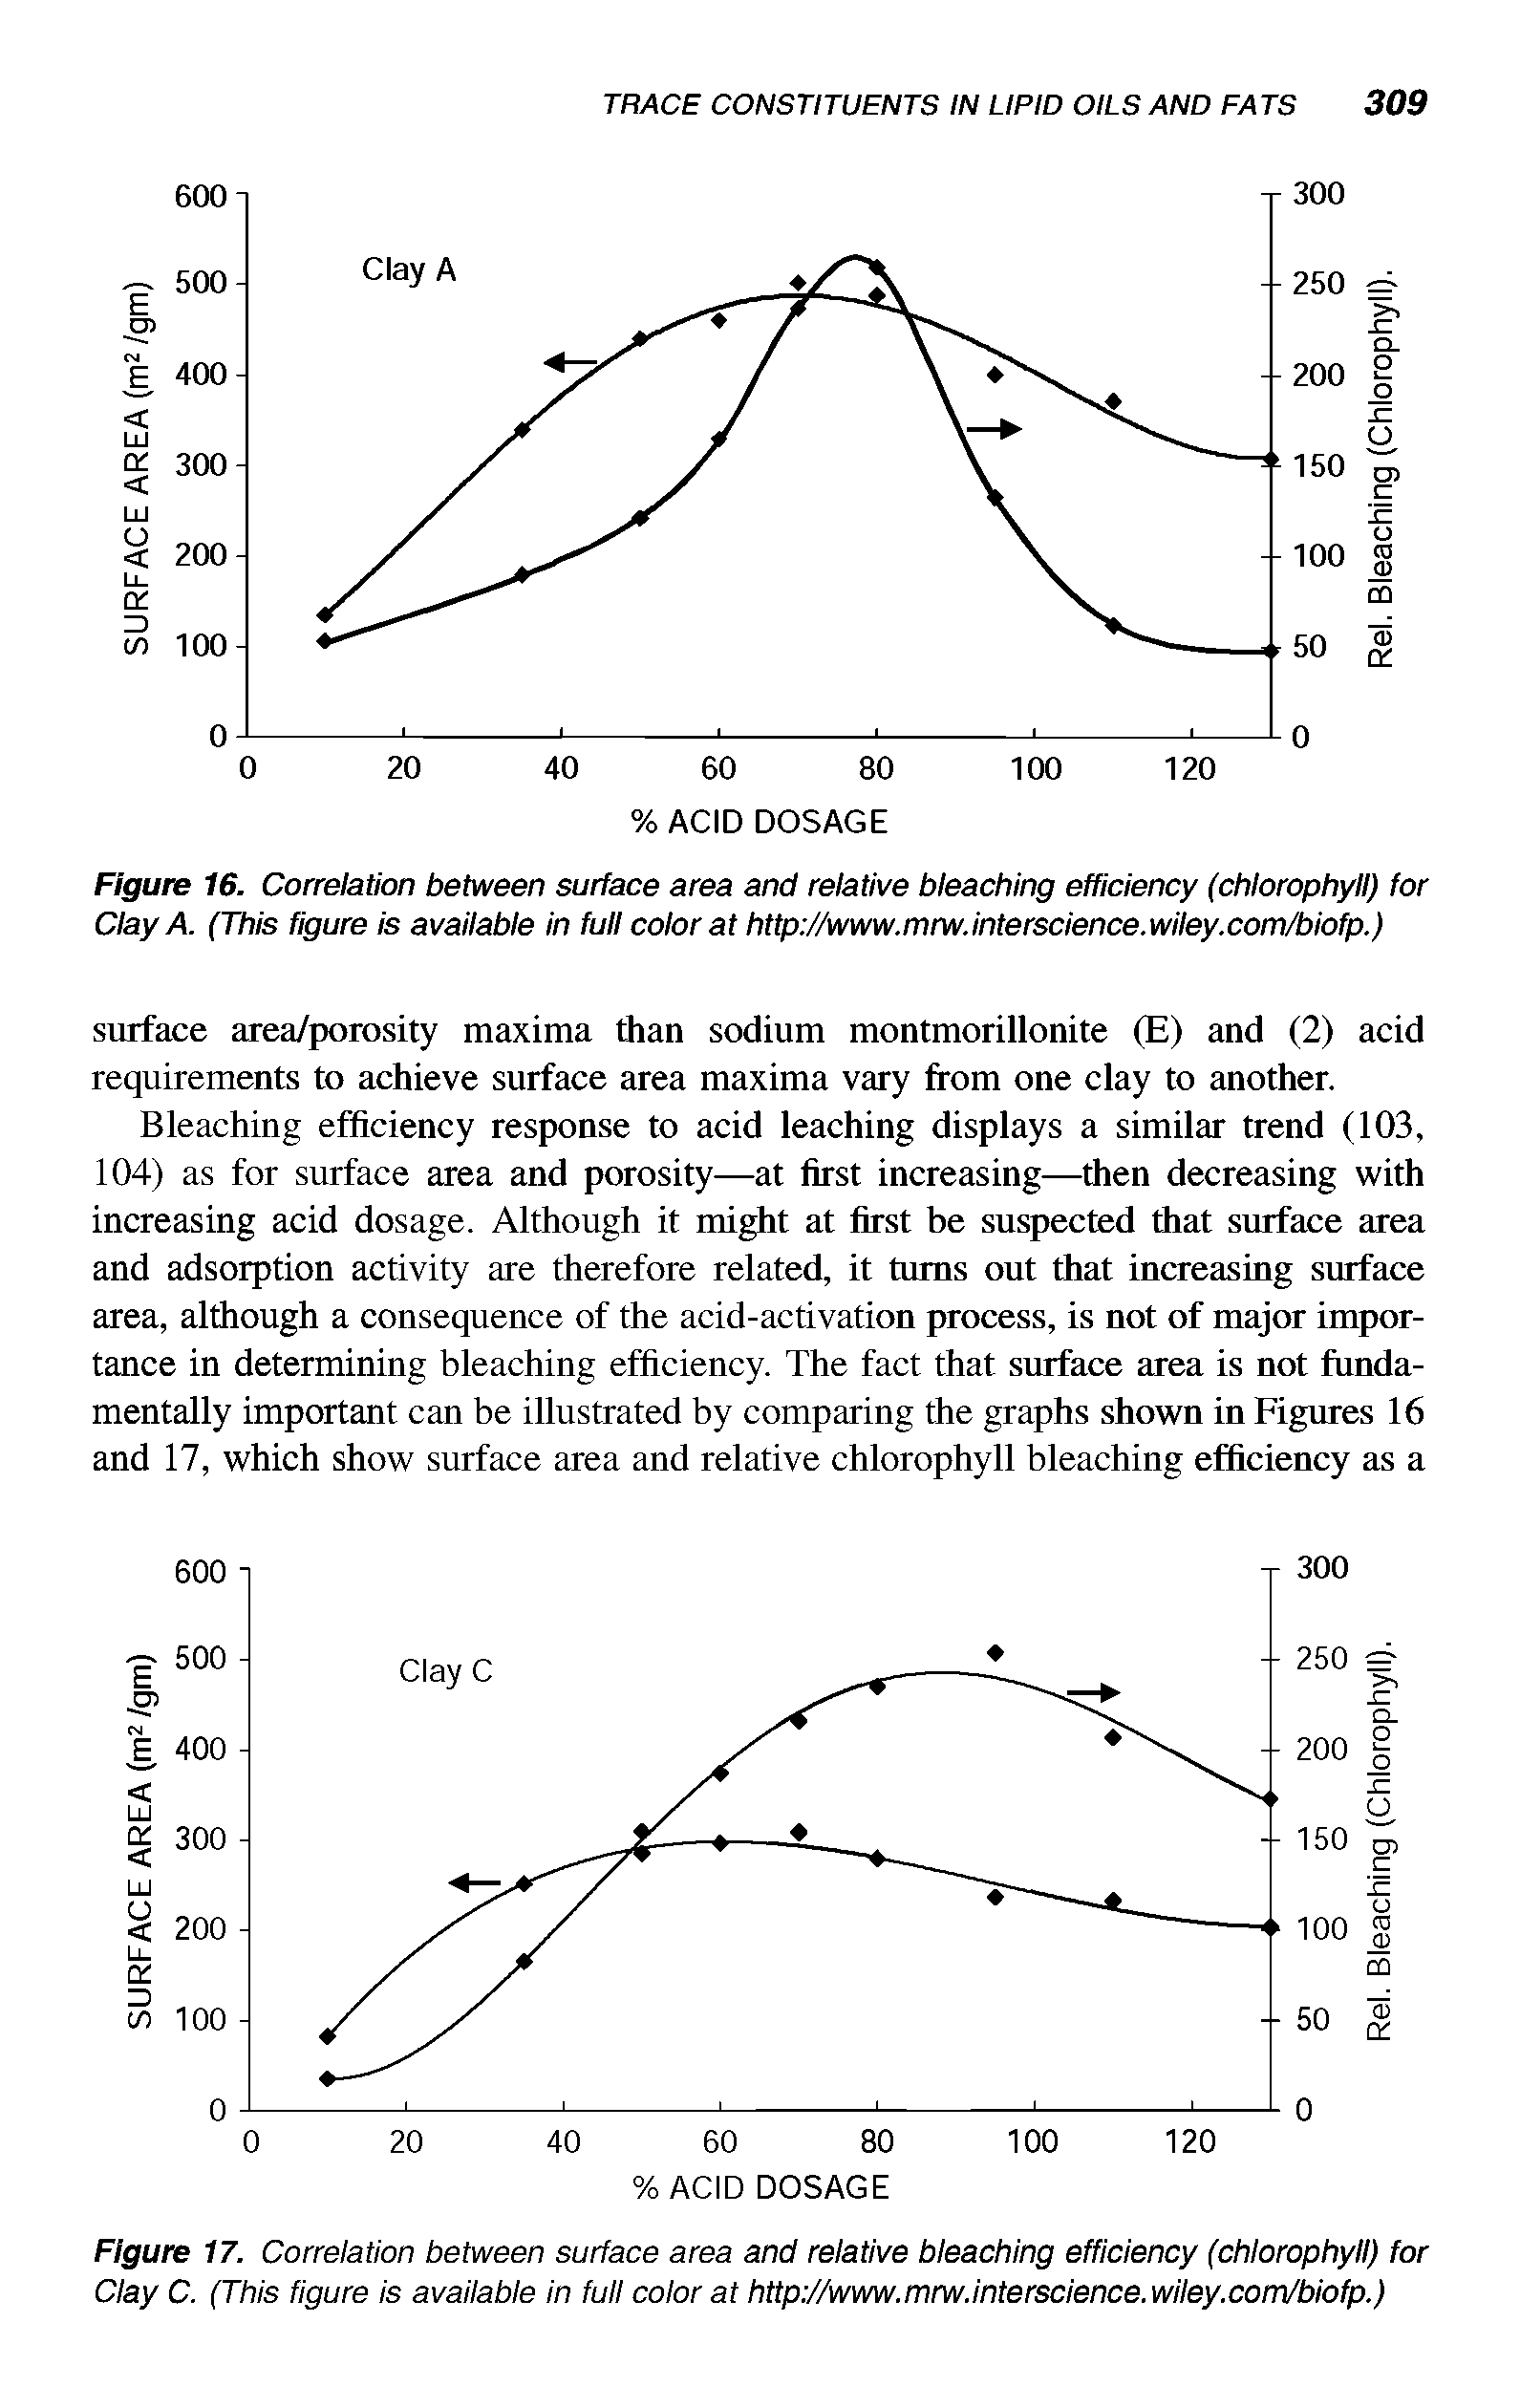 Figure 16. Correlation between surface area and relative bleaching efficiency (chlorophyll) for Clay A. (This figure is available in full color at http //www.mnv.interscience.wiley.com/biofp.)...